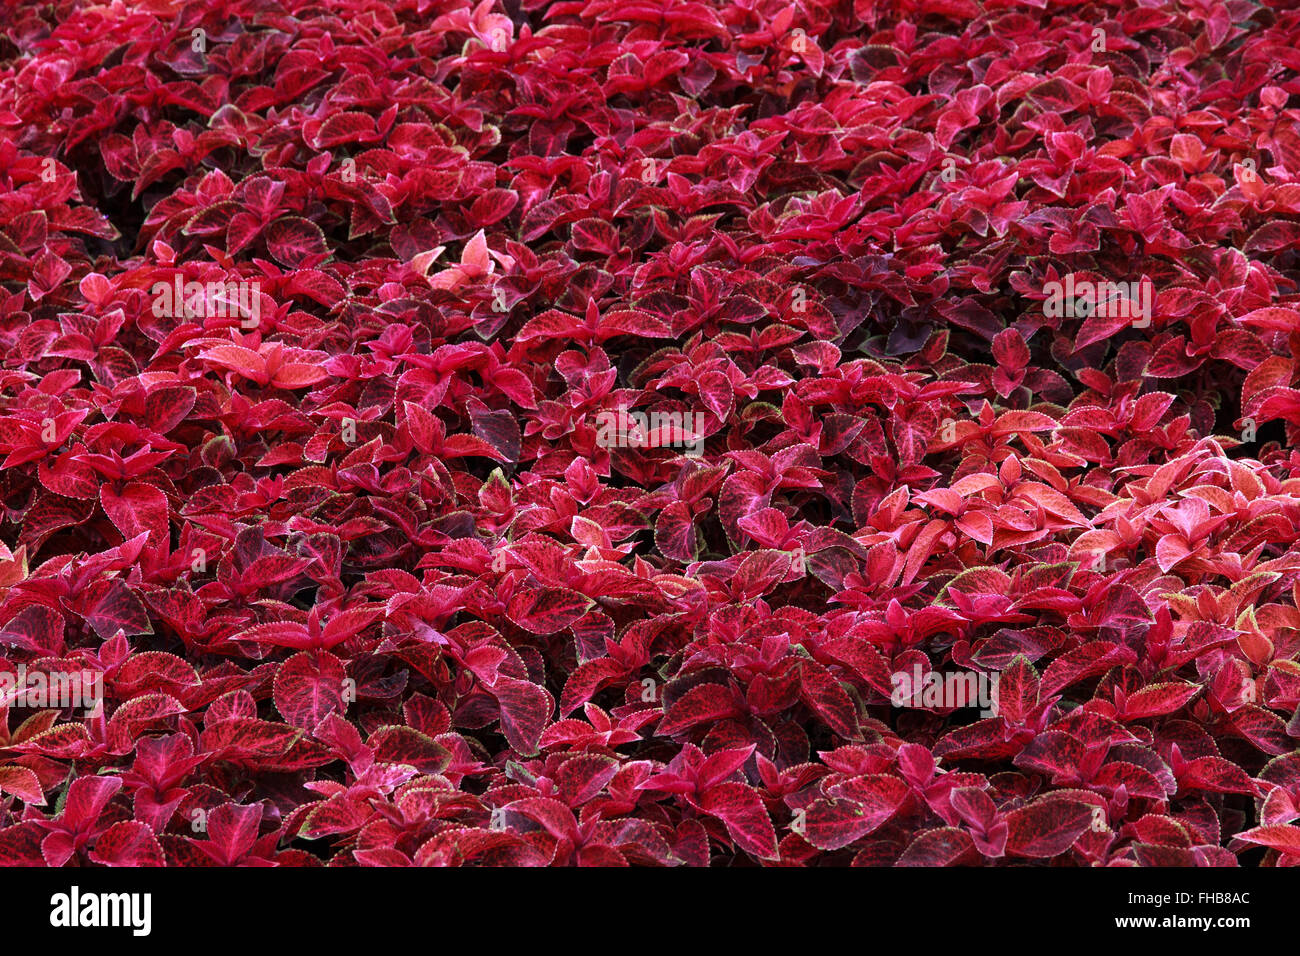 Vibrant Red Coleus used as decorative ground cover, Nong Nooch, Pattaya, Thailand. Stock Photo